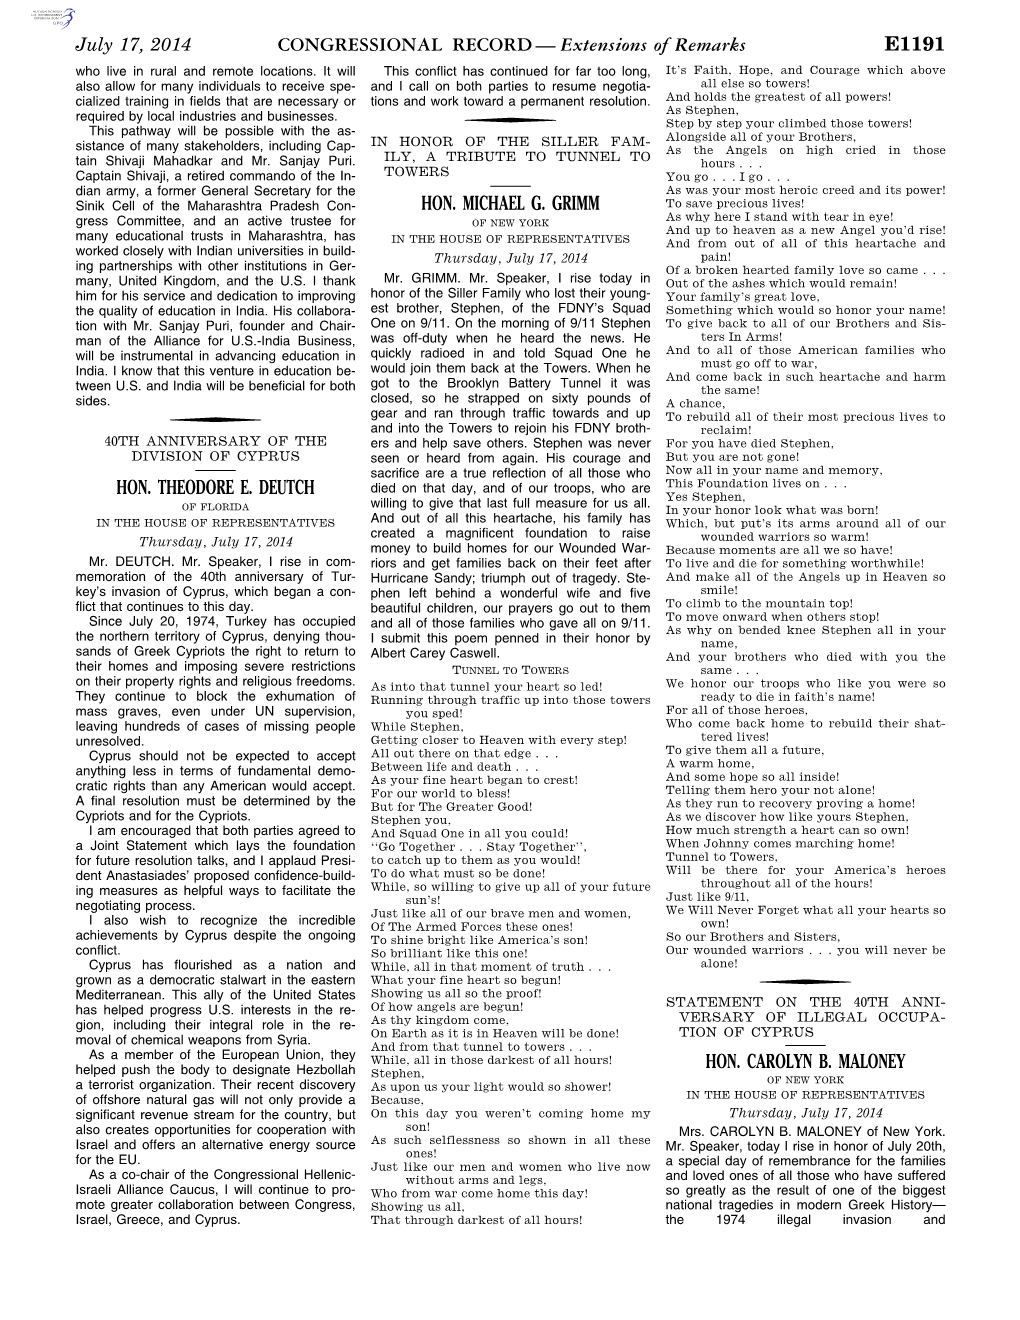 CONGRESSIONAL RECORD— Extensions of Remarks E1191 HON